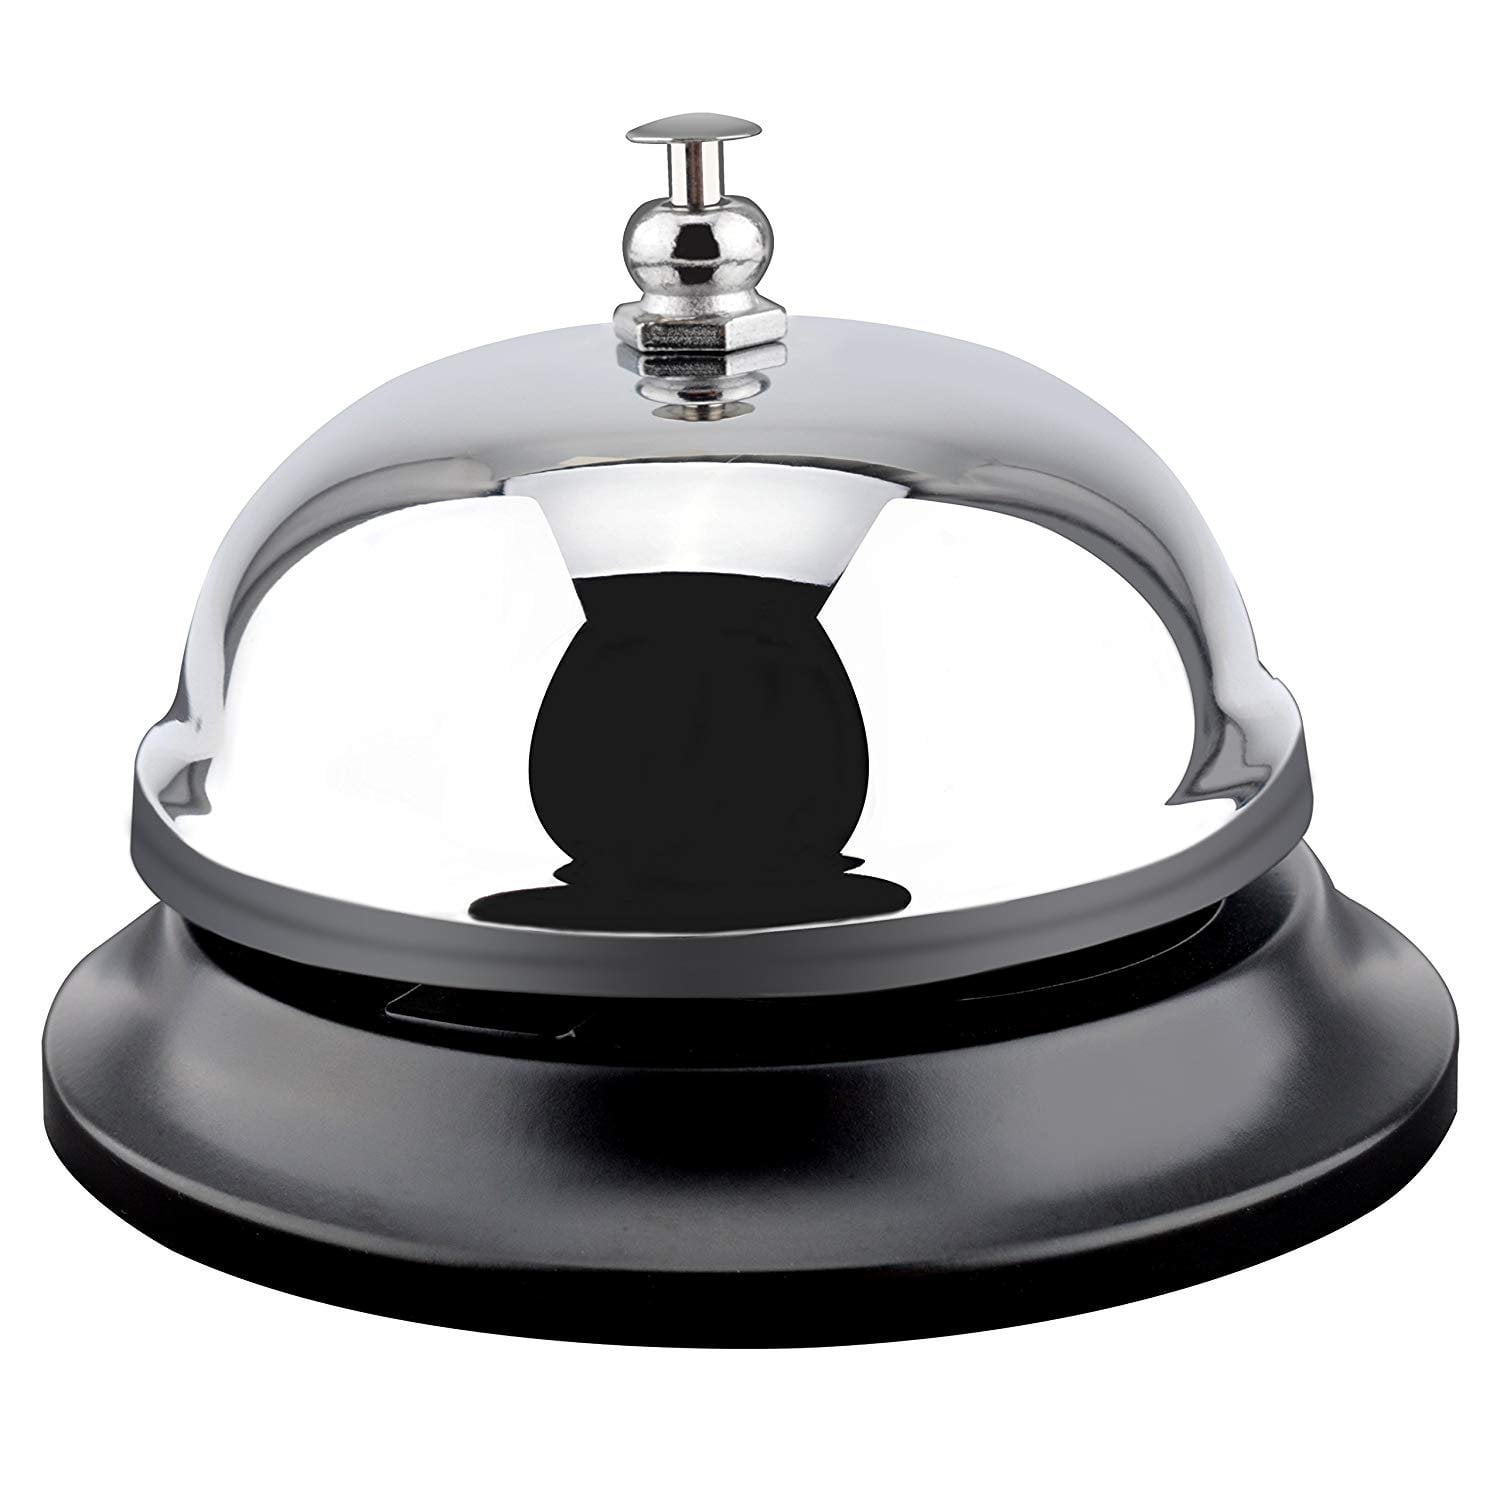 BUYGOO Silver Service Bell Desk Bell Ring Reception Bell Counter Top Bell for... 